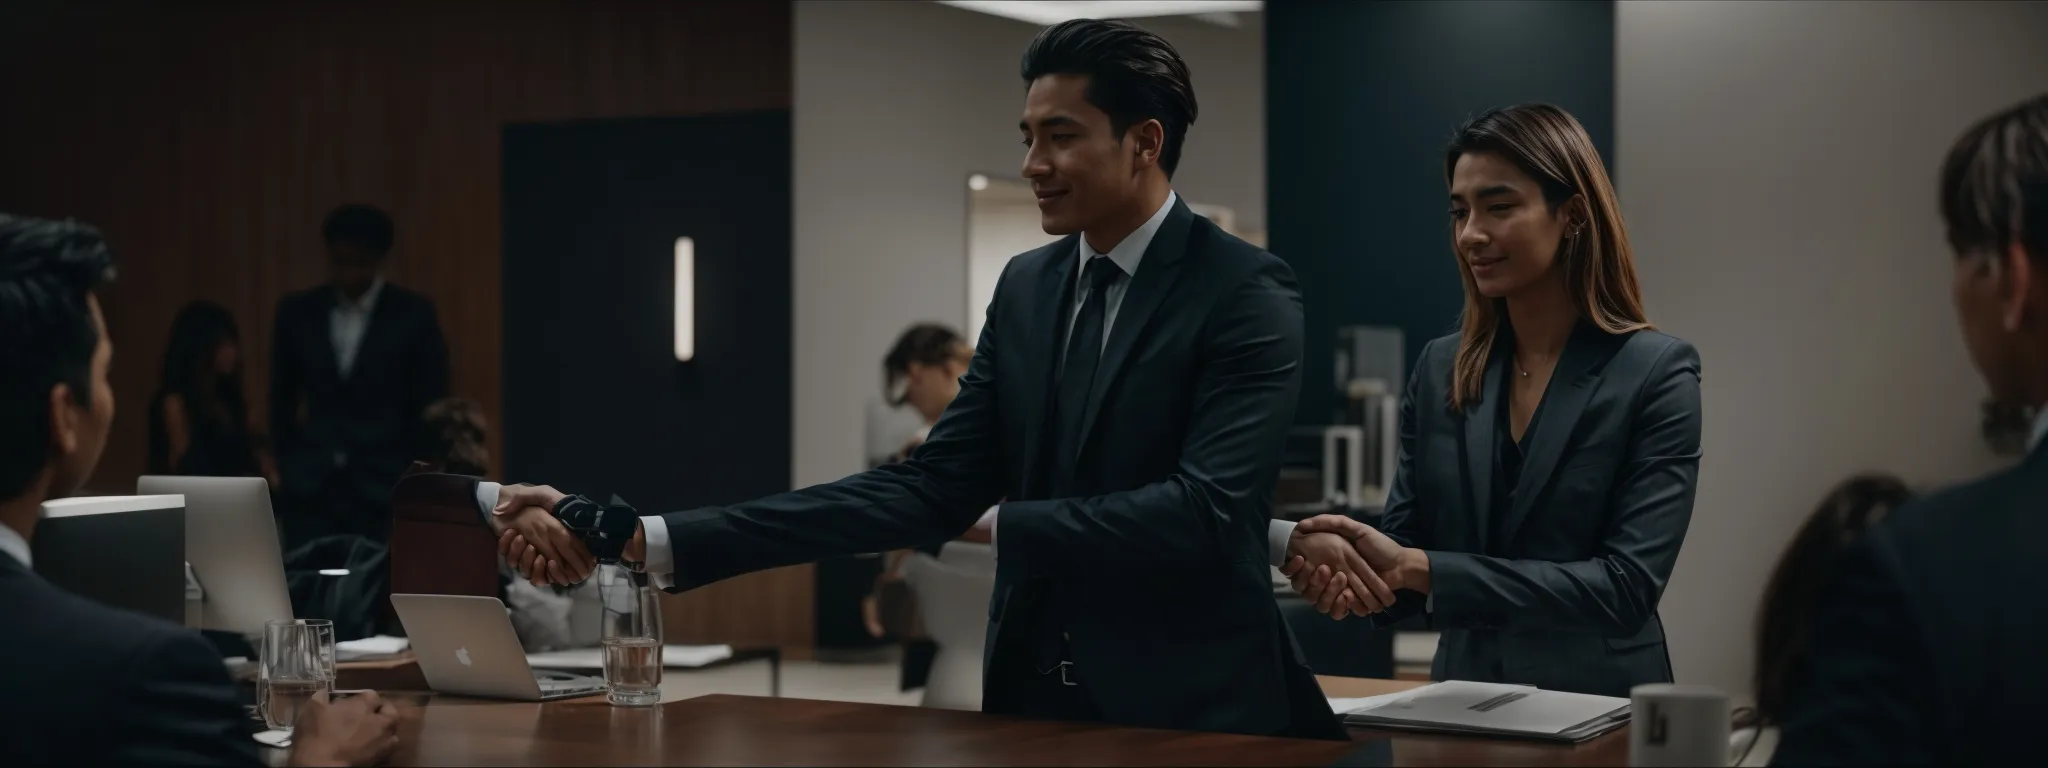 a marketer and influencer shaking hands in a modern office, symbolizing a partnership deal.